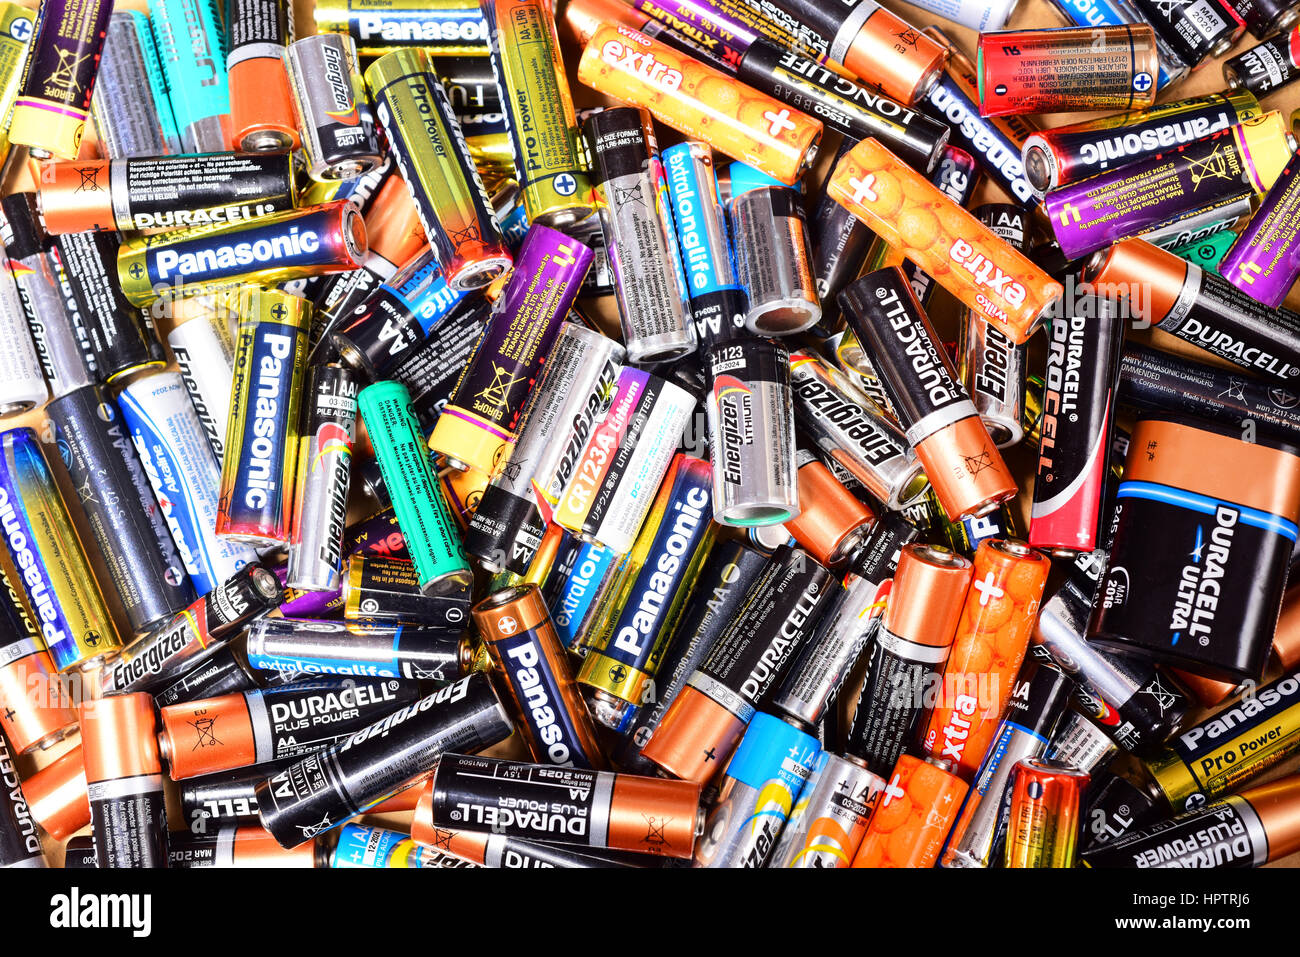 giant-pile-of-old-aa-and-aaa-batteries-HPTRJ6.jpg